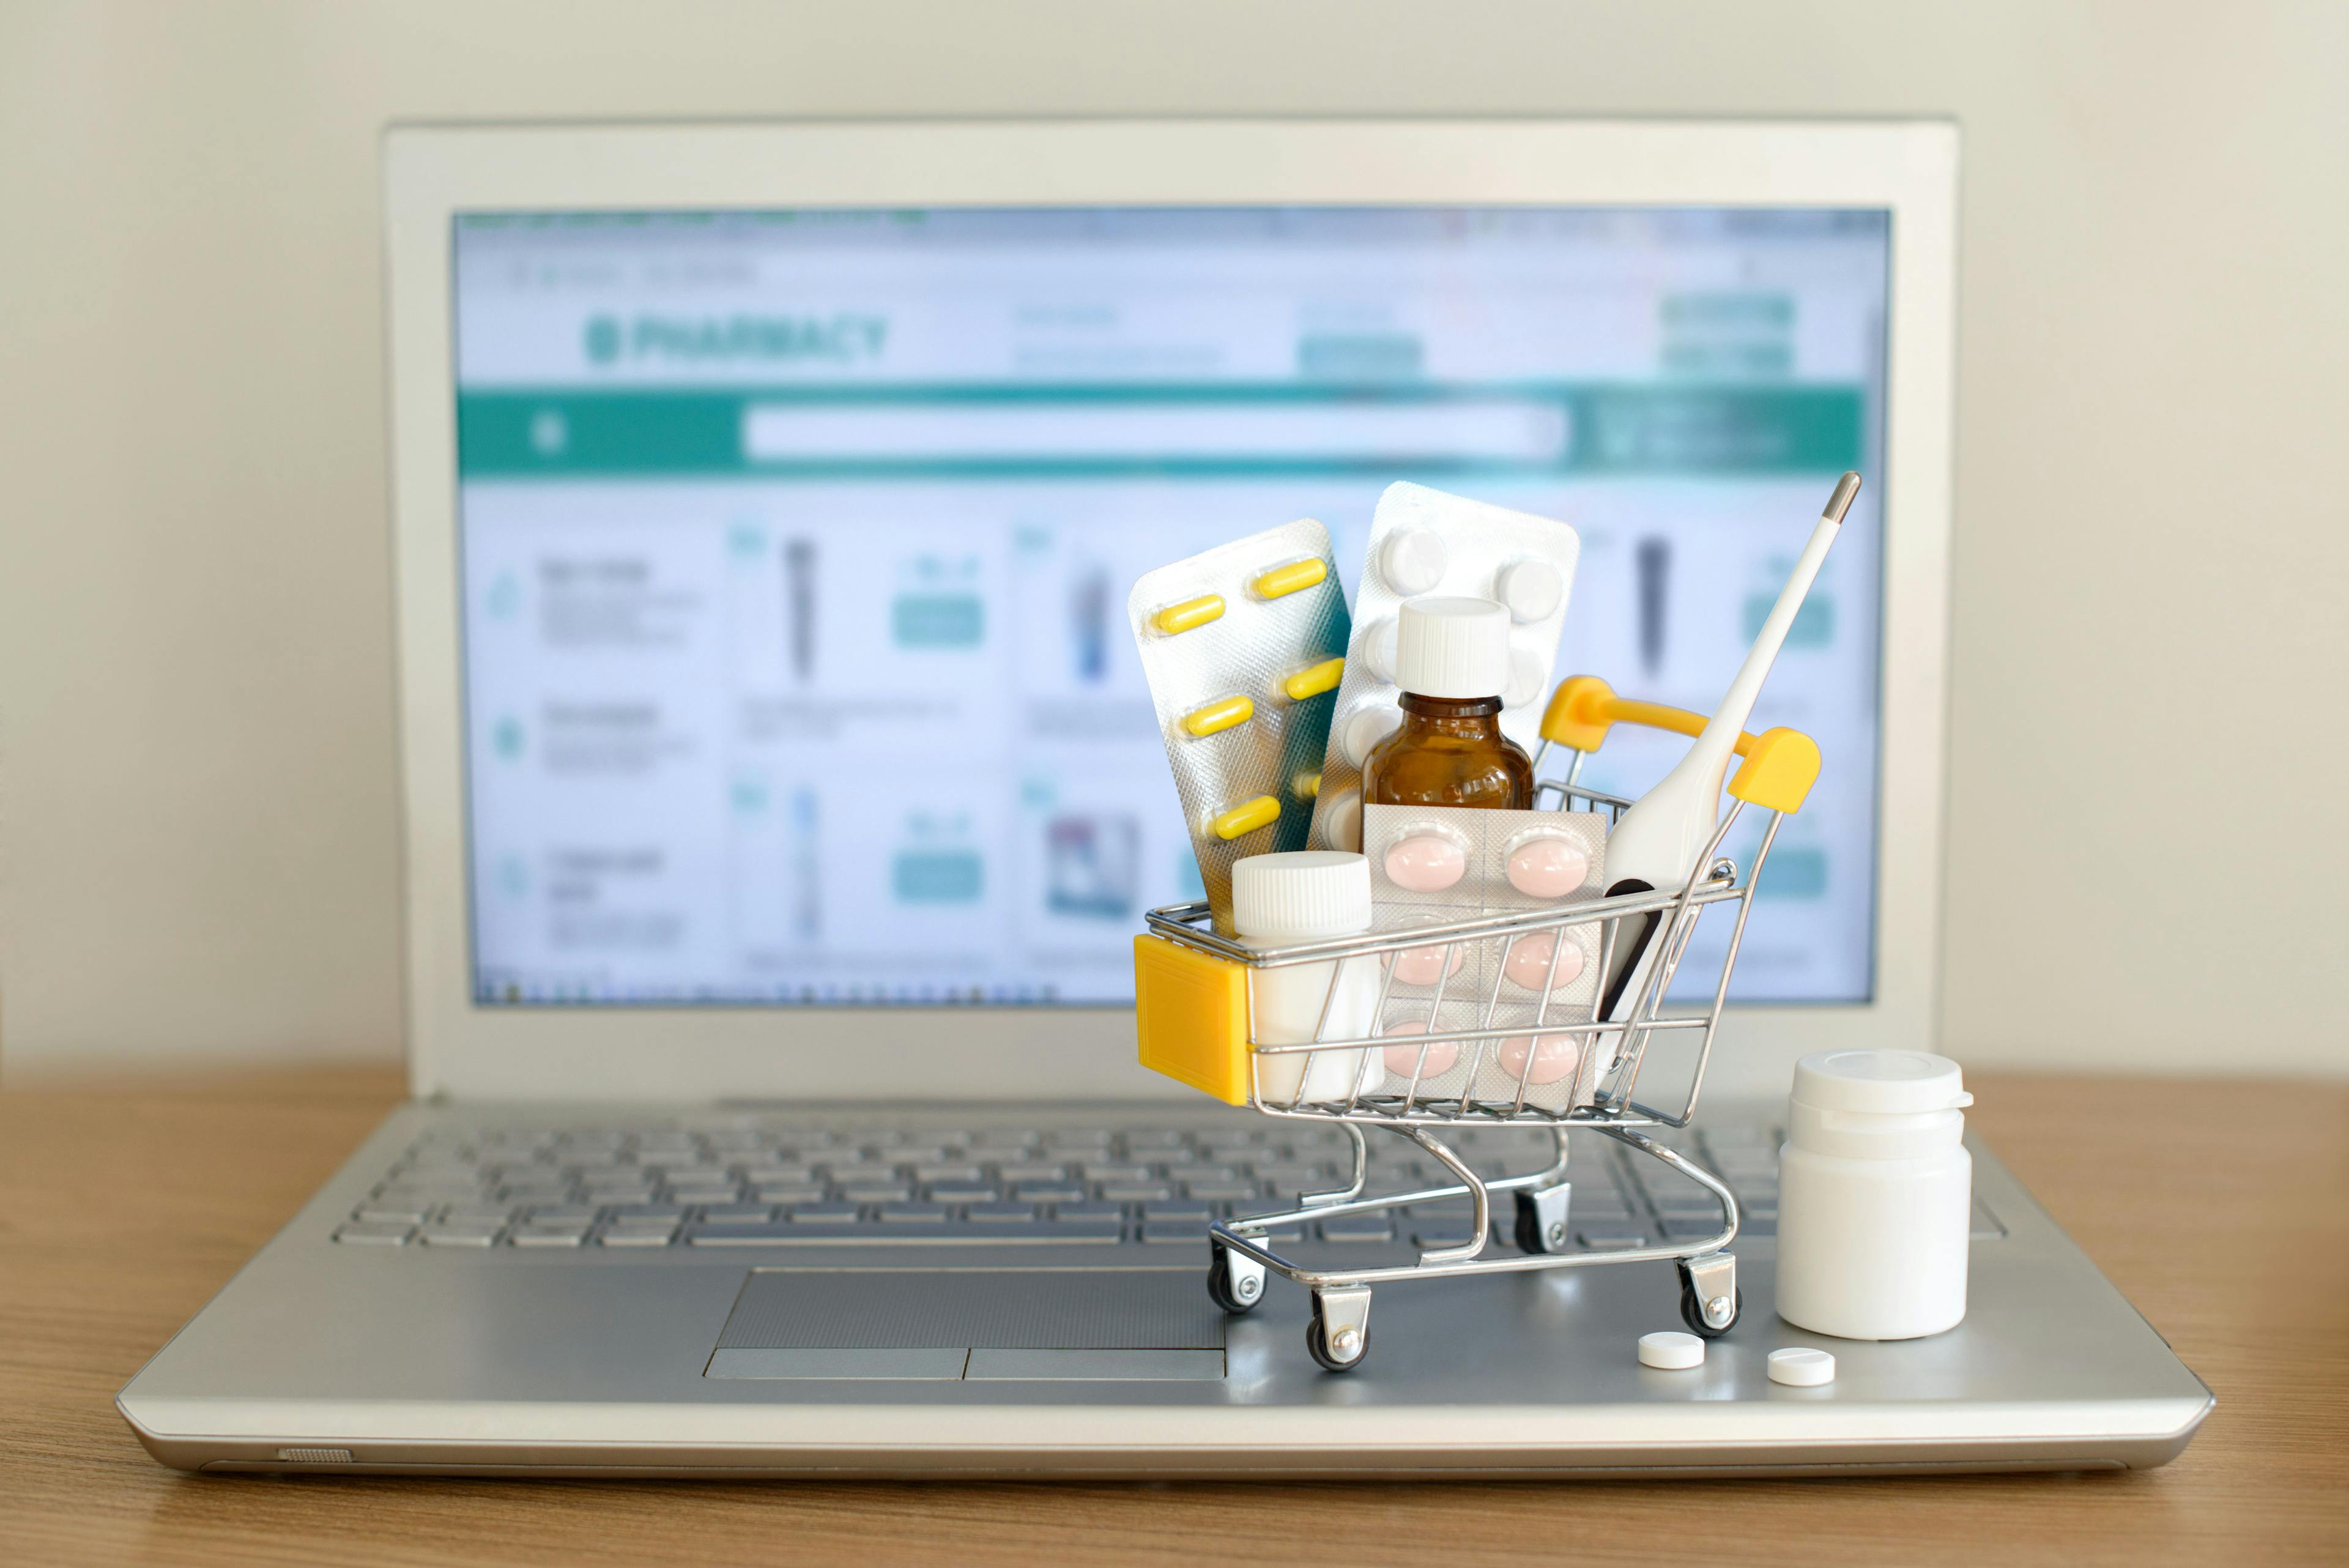 toy shopping cart of medications sitting on a laptop | credit: evso - stock.adobe.com